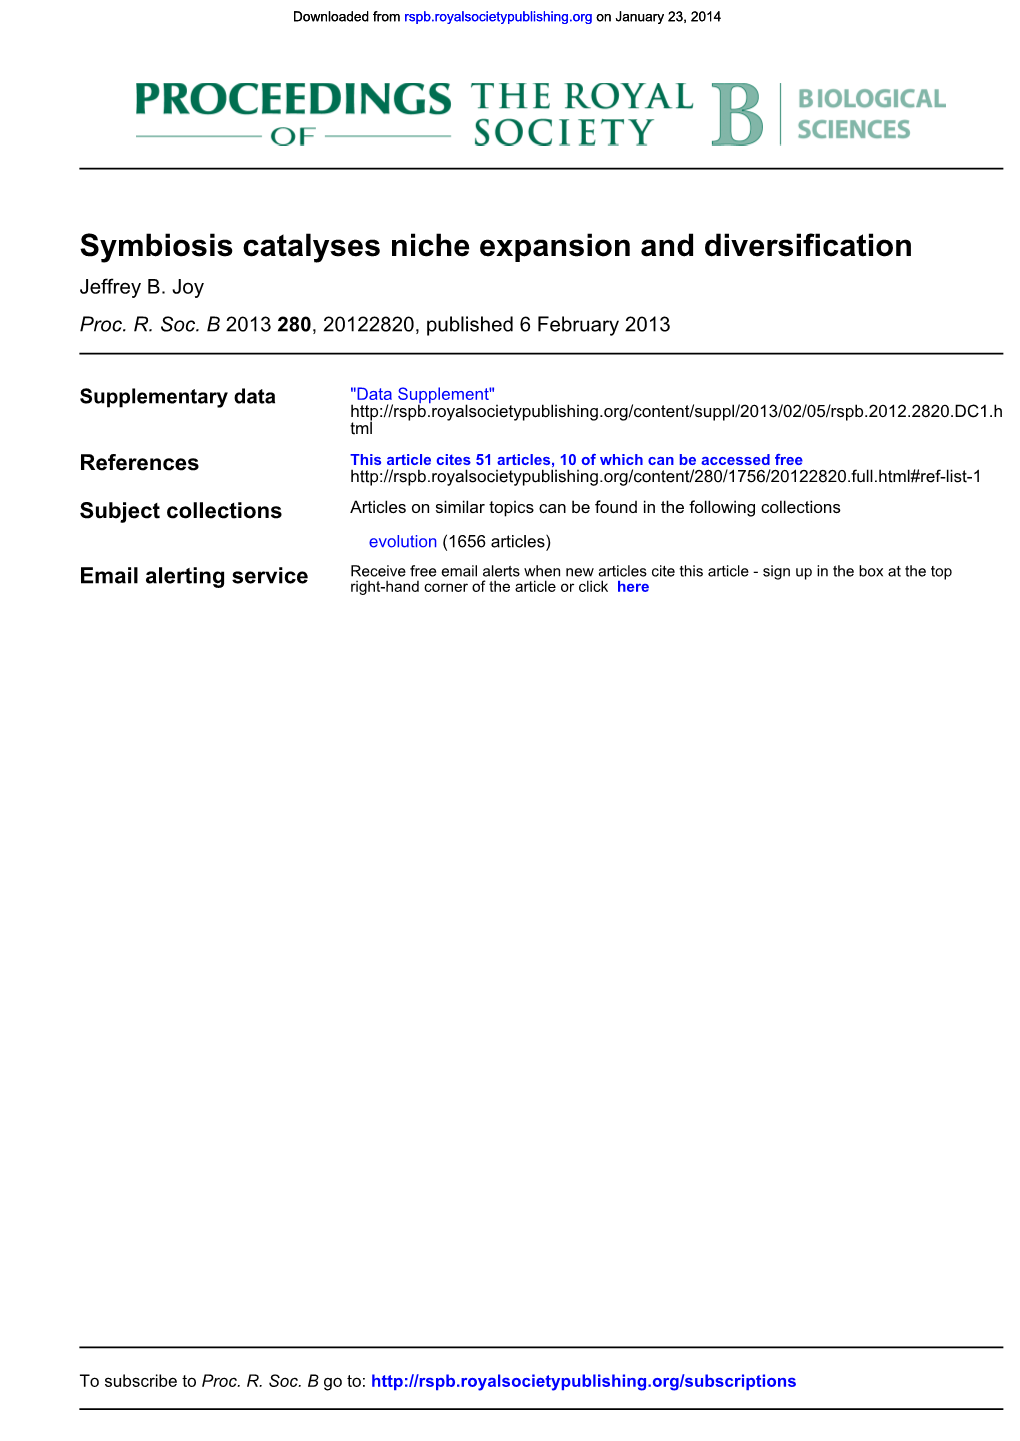 Symbiosis Catalyses Niche Expansion and Diversification